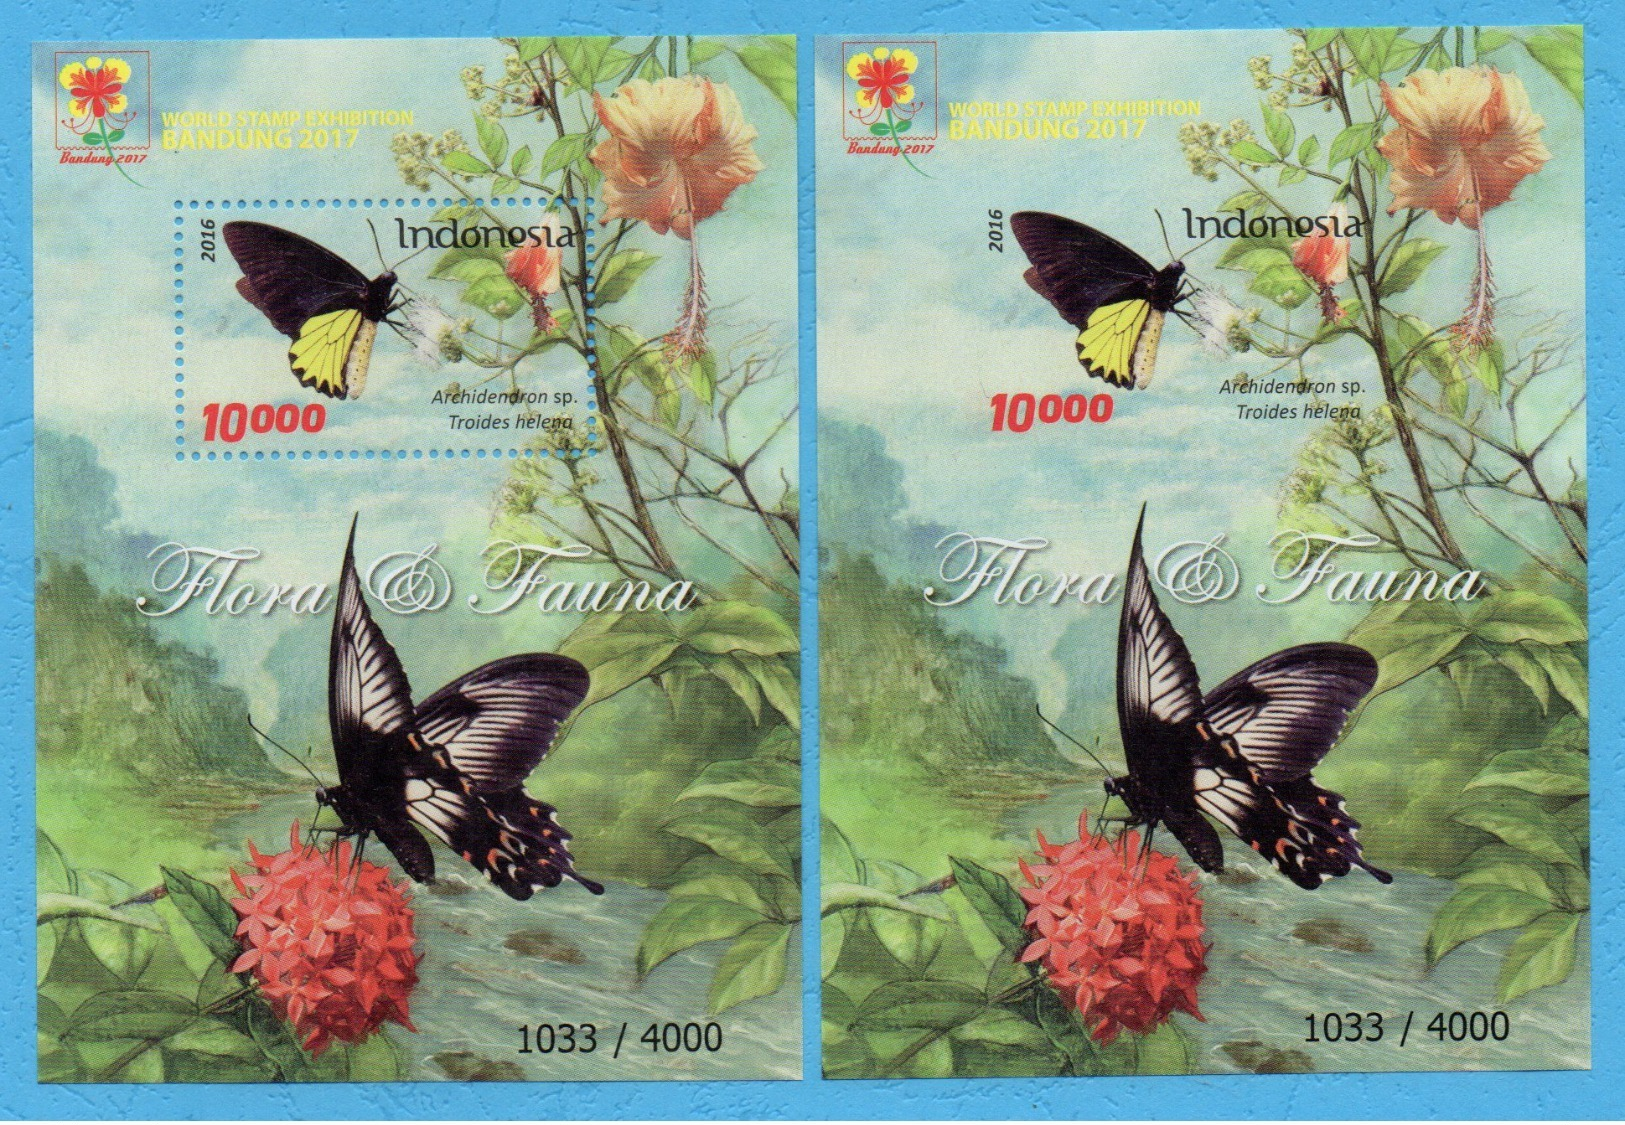 INDONESIA 2016 BUTTERFLY FLOWERS OVPT BANDUNG 2017 PERF & IMPERF 2 SS SOUVENIR SHEET STAMPS MNH - Indonésie